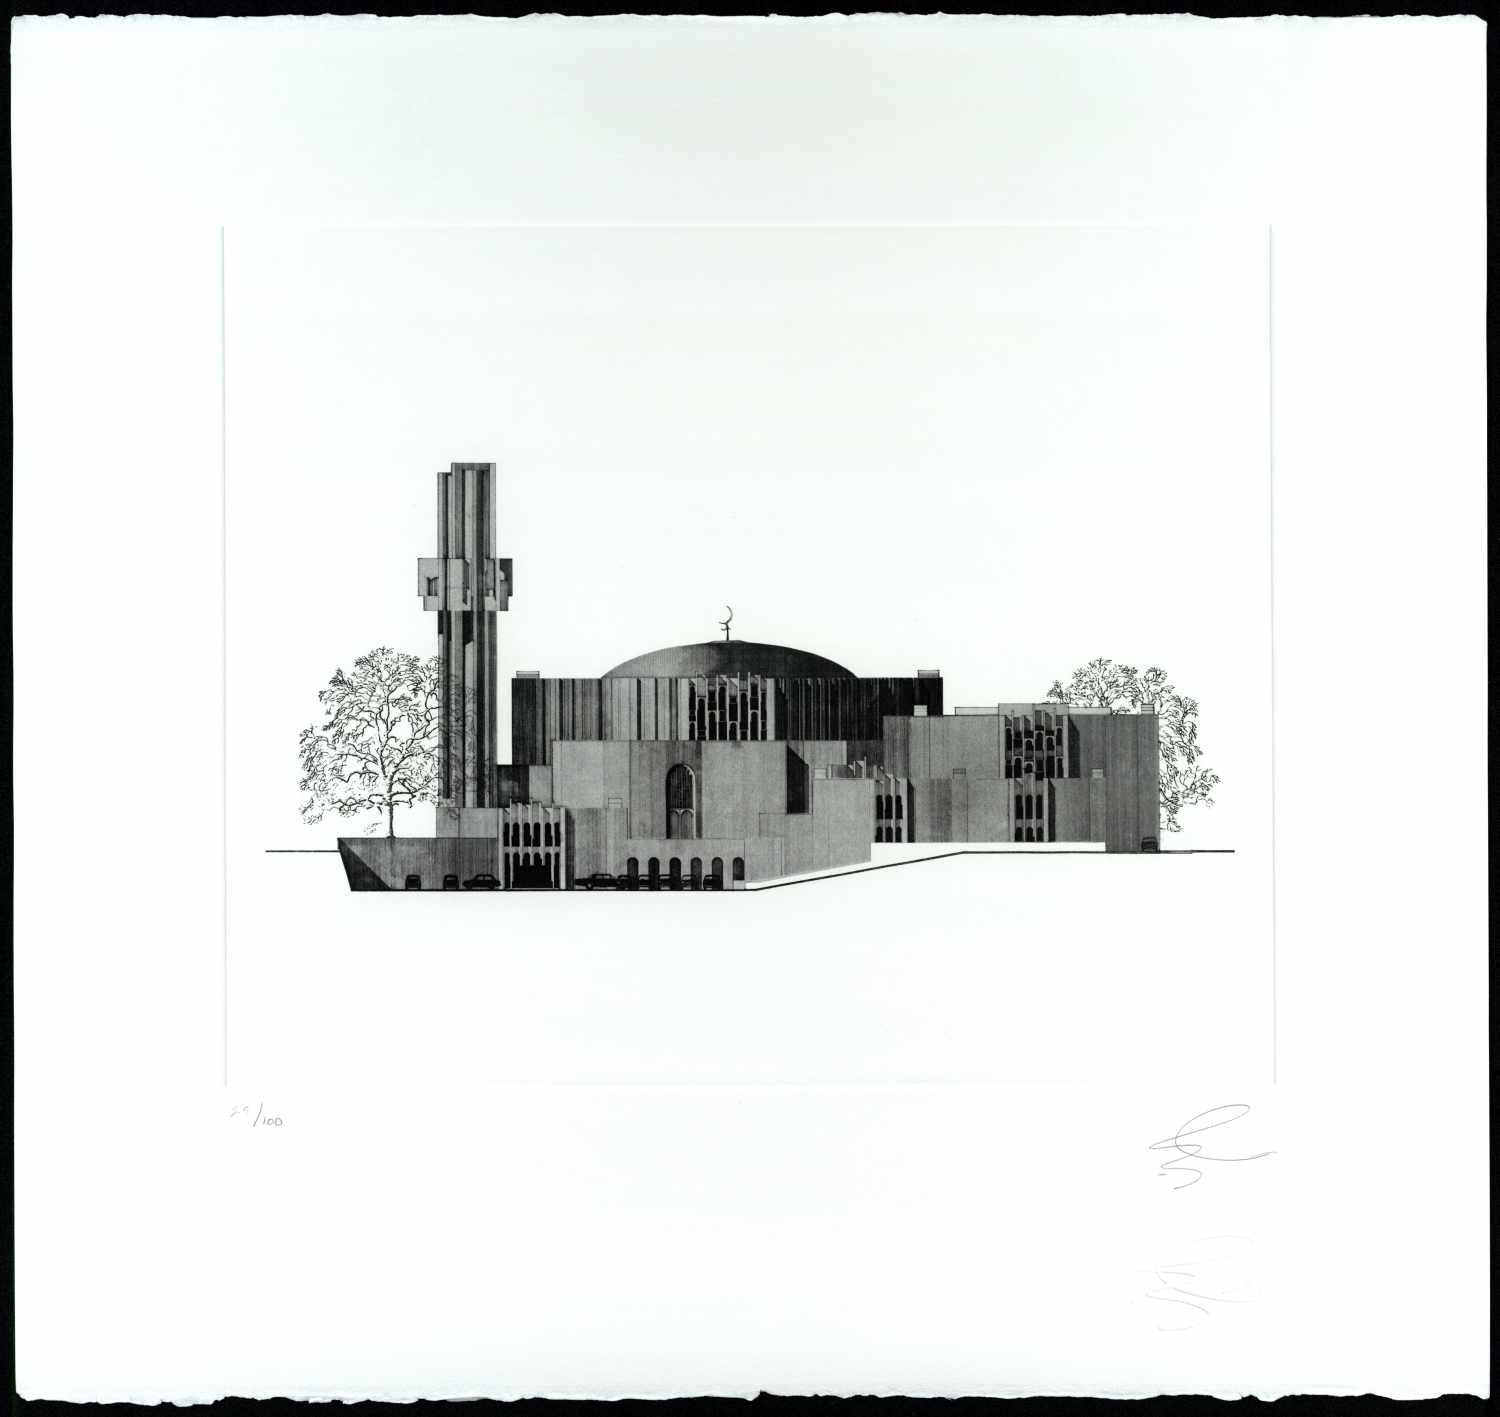 Elevation of London Central Mosque (Competition Entry, 1969, London). From&nbsp;<span style="font-style: italic;">The Architecture of Rifat Chadirji: A Collection of Twelve Etchings</span>.